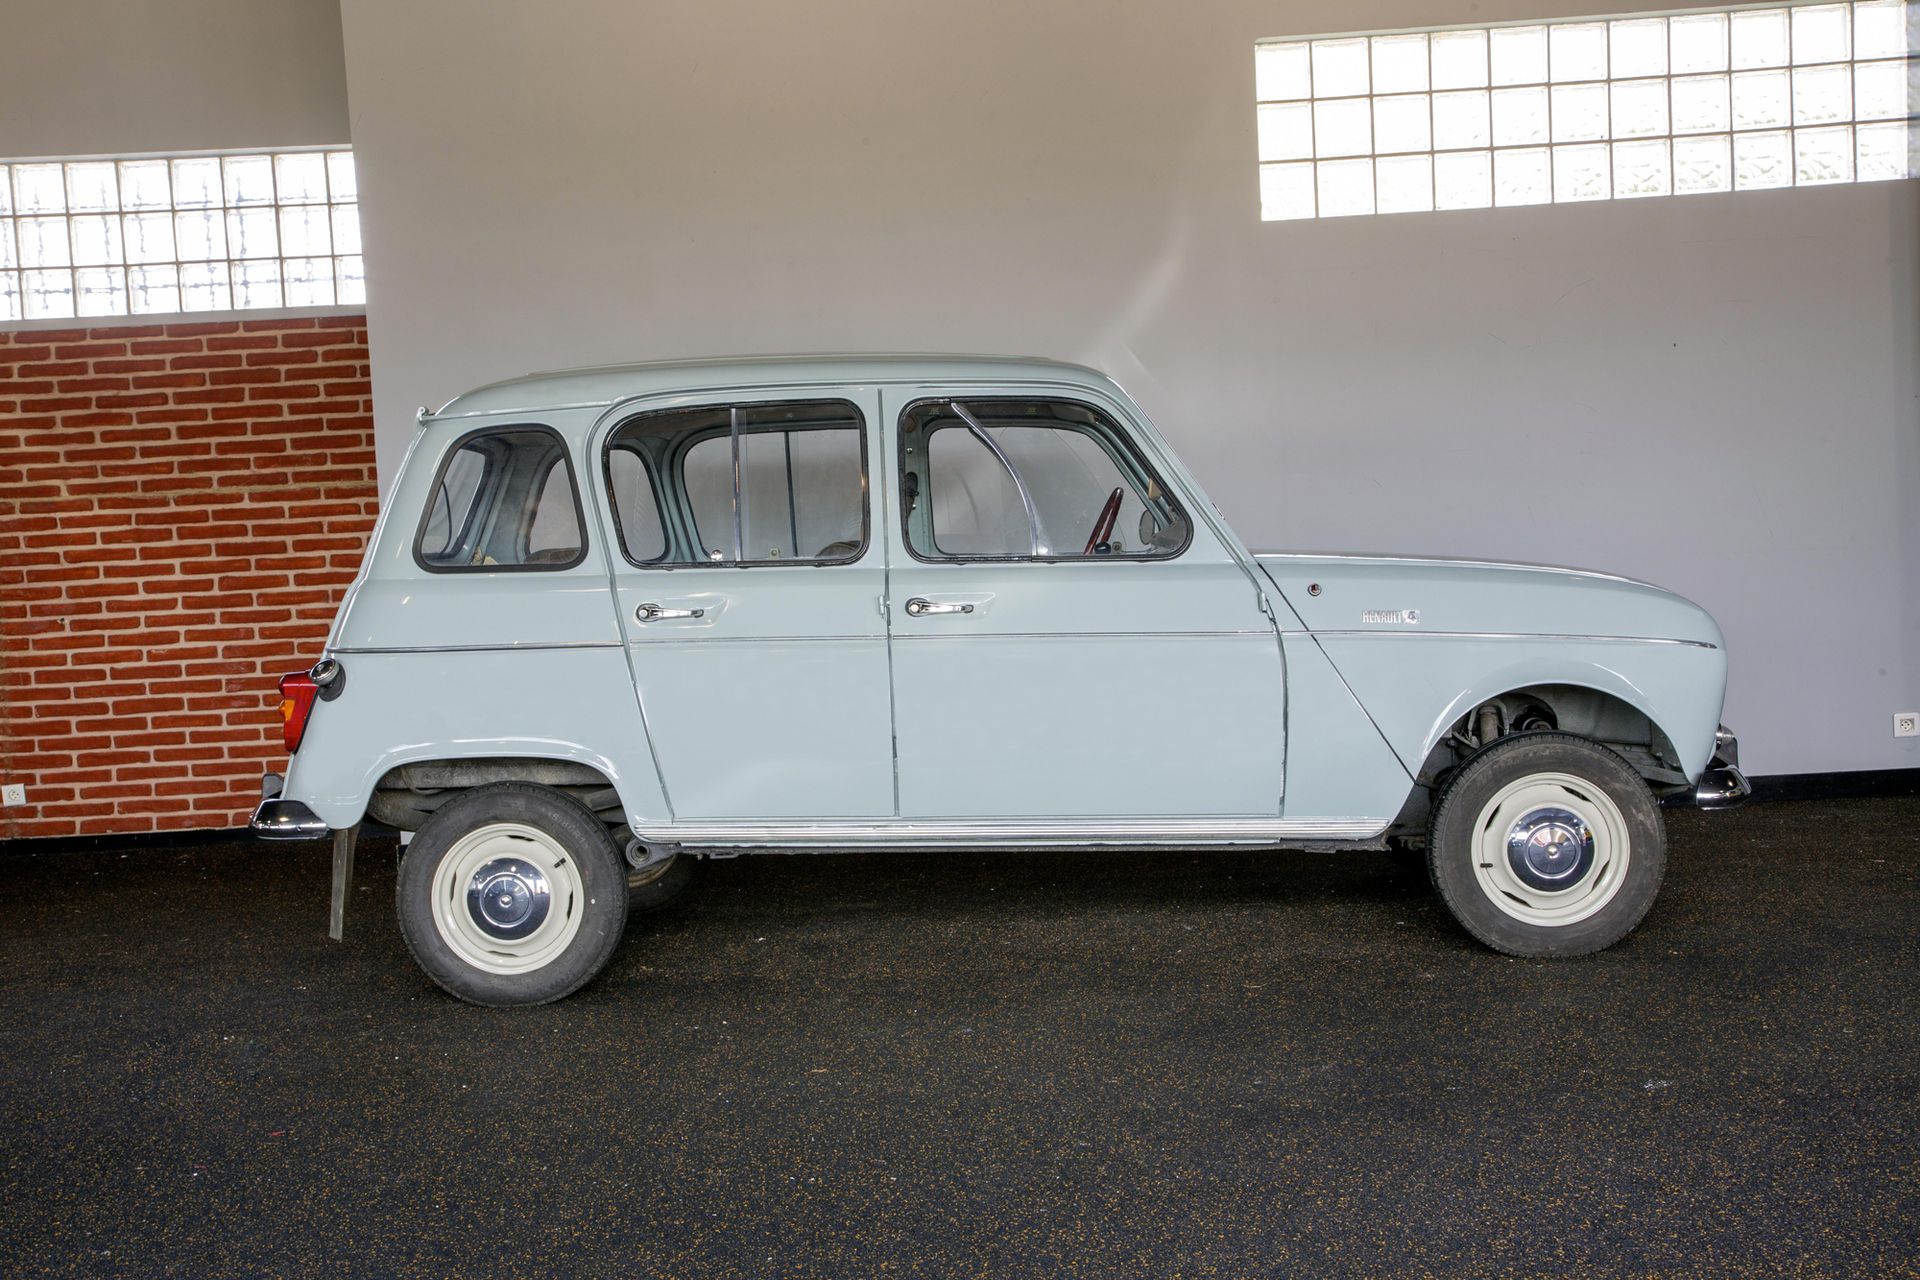 1968 RENAULT 4L 1968 RENAULT 4L


The French icon





More than 8 million Frenc&hellip;